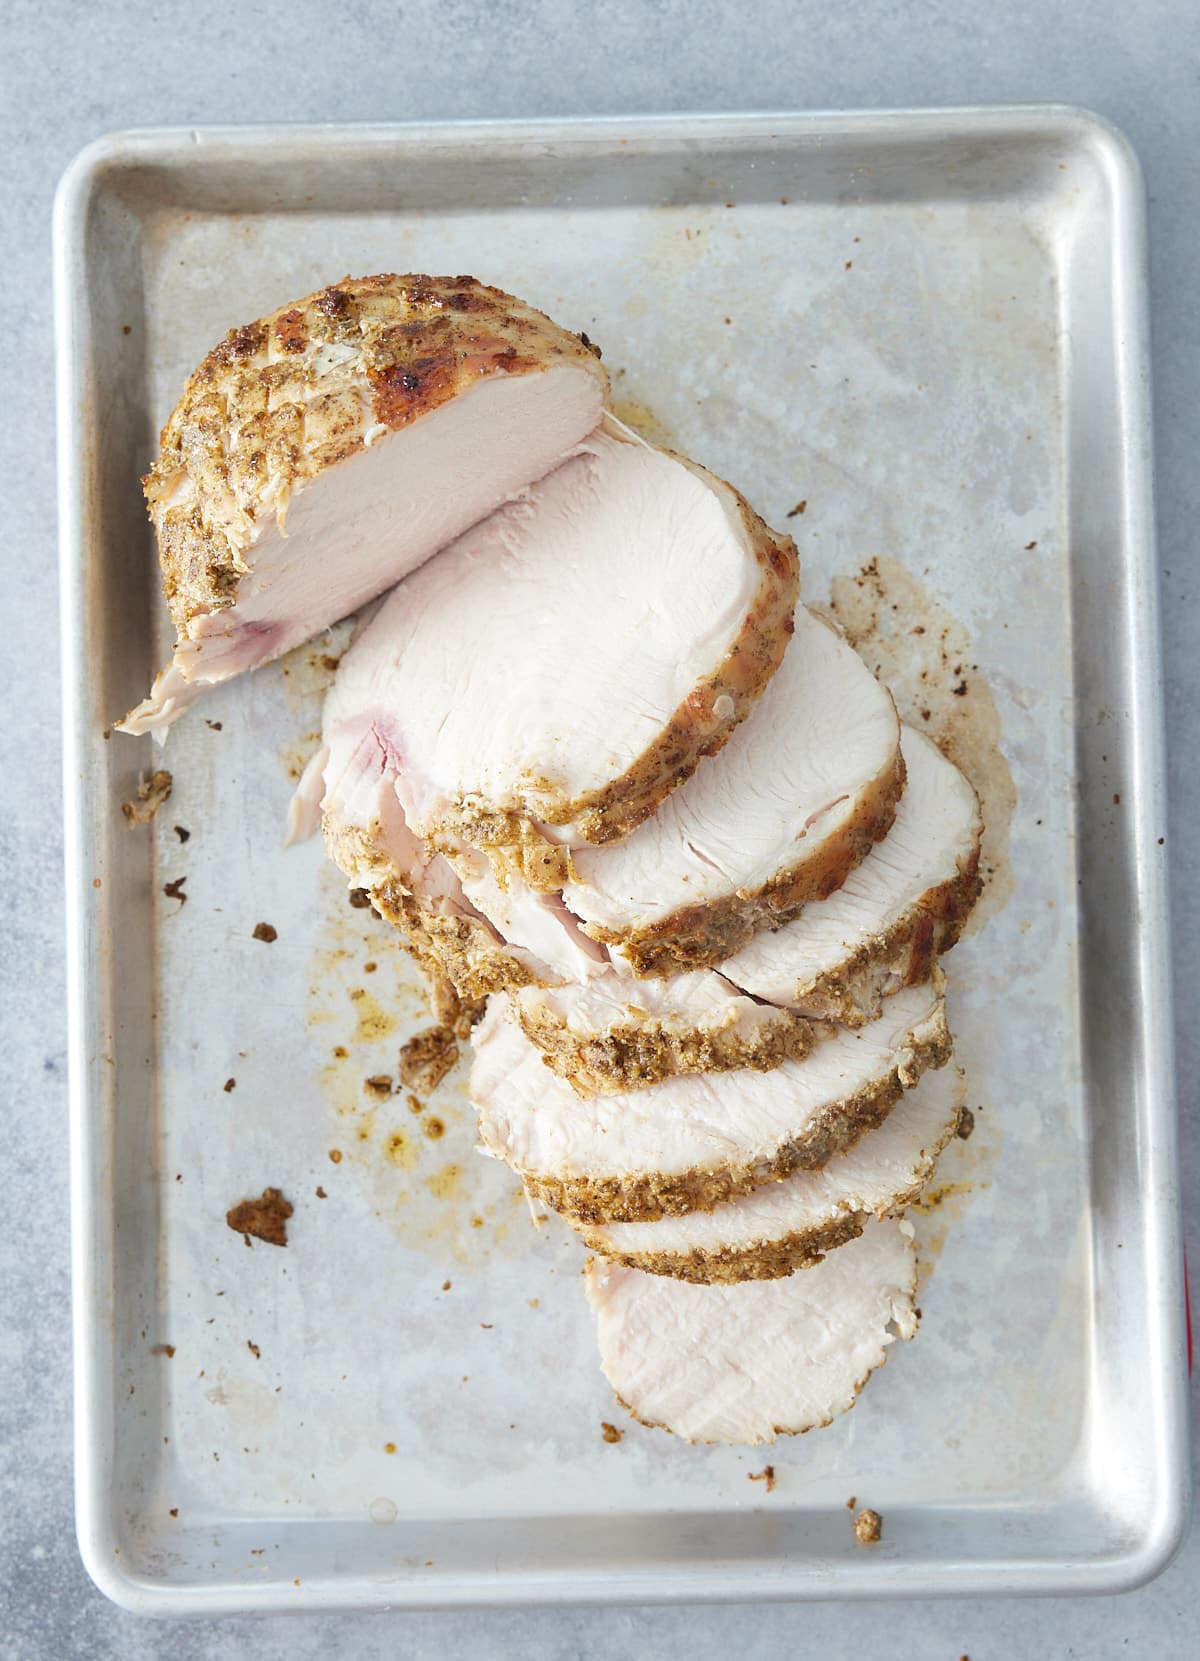 Sheet pan with roasted and sliced turkey breast